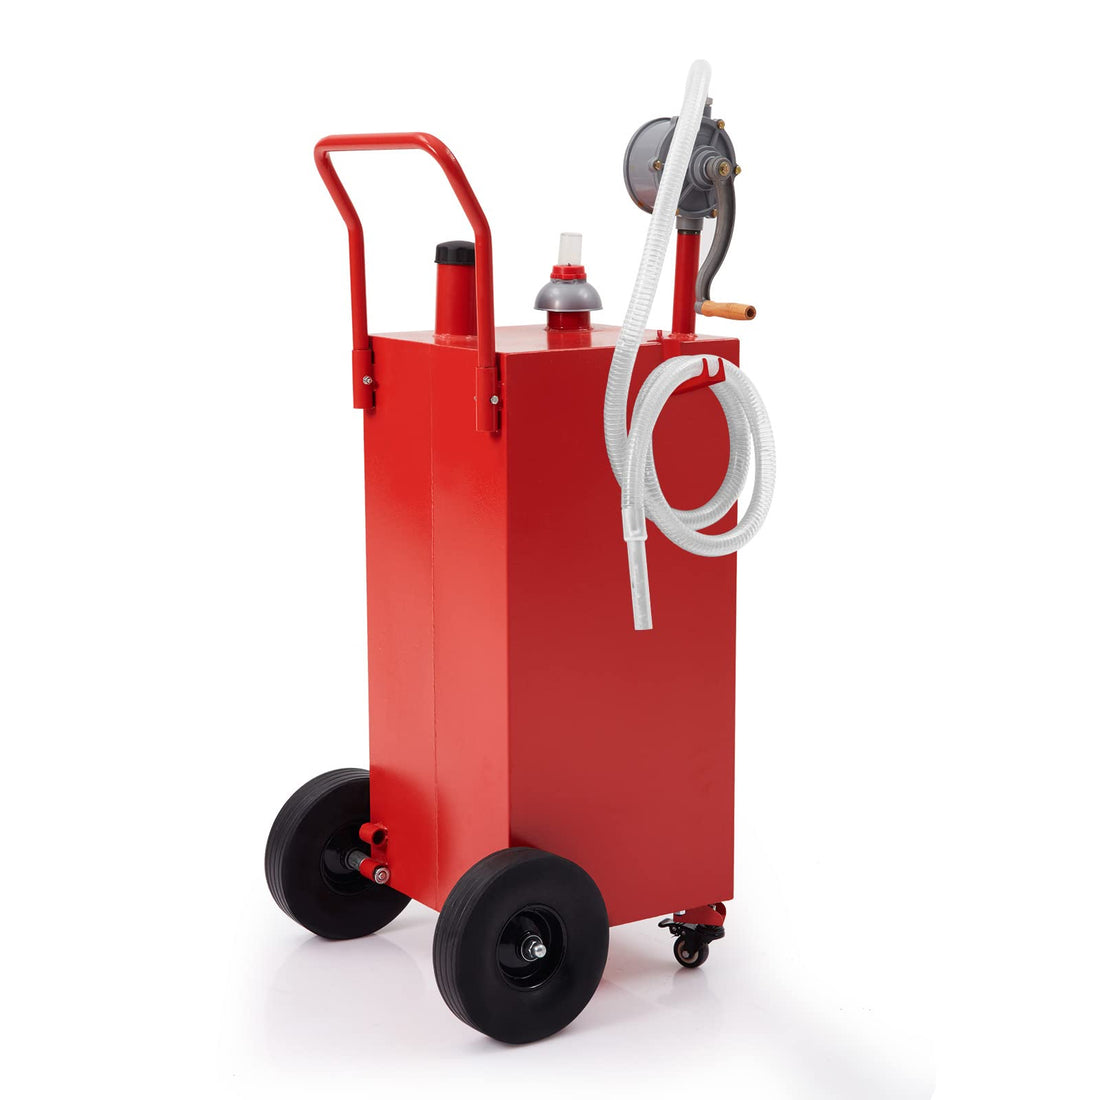 40 Gal Red Portable Gas Caddy with Pump for Fuel Storage